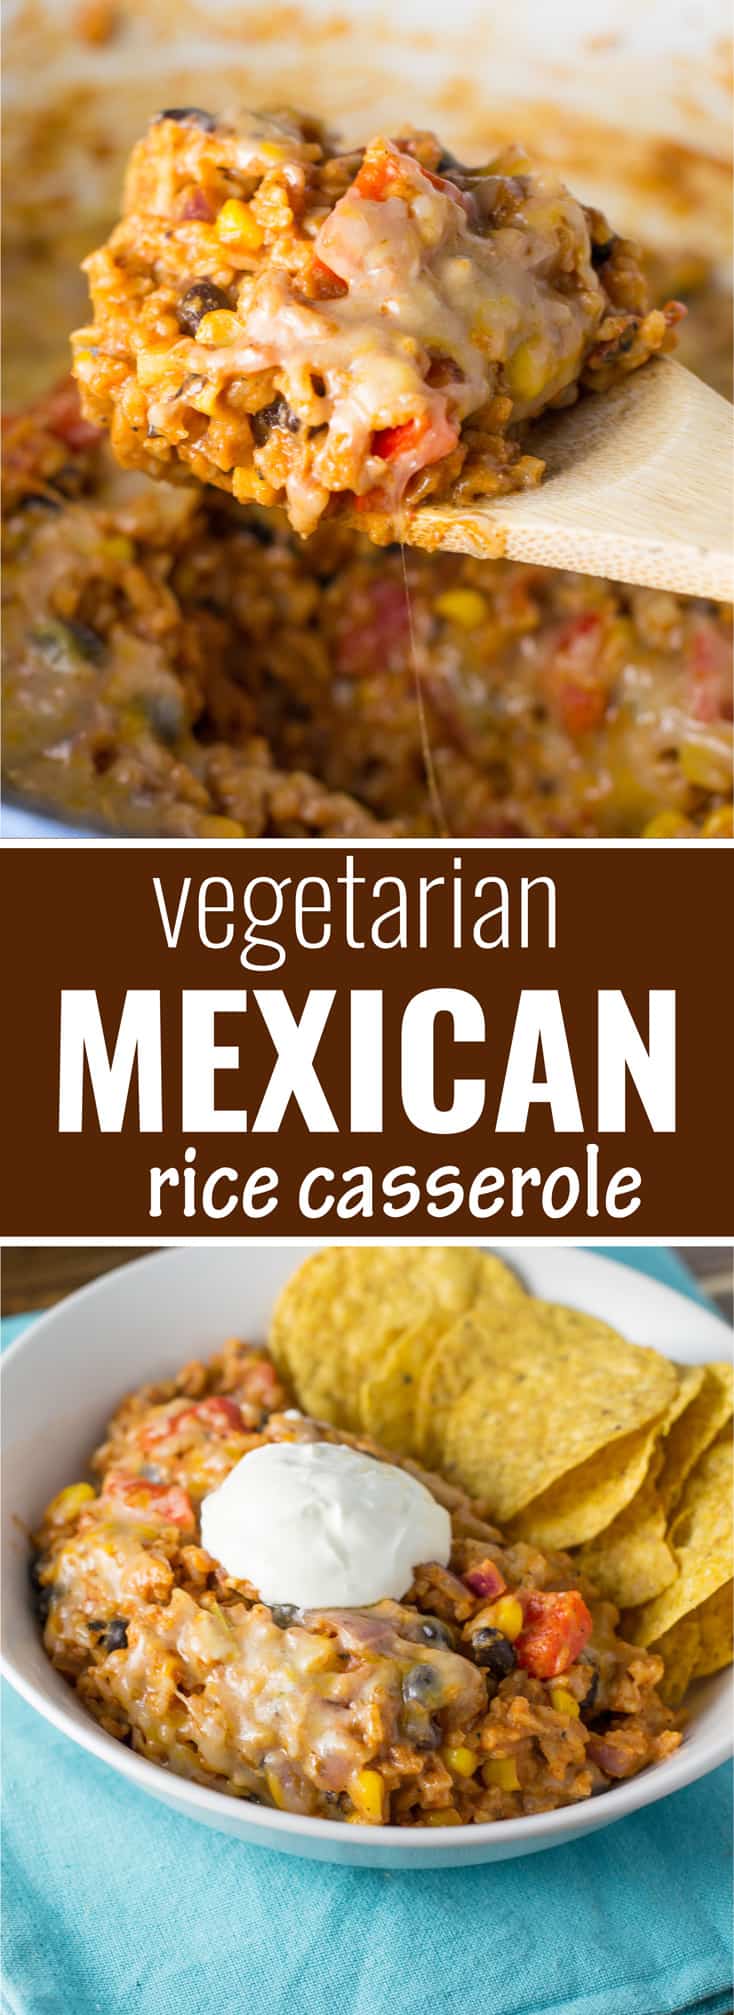 Vegetarian Mexican Rice Casserole recipe - w/ bell peppers and corn